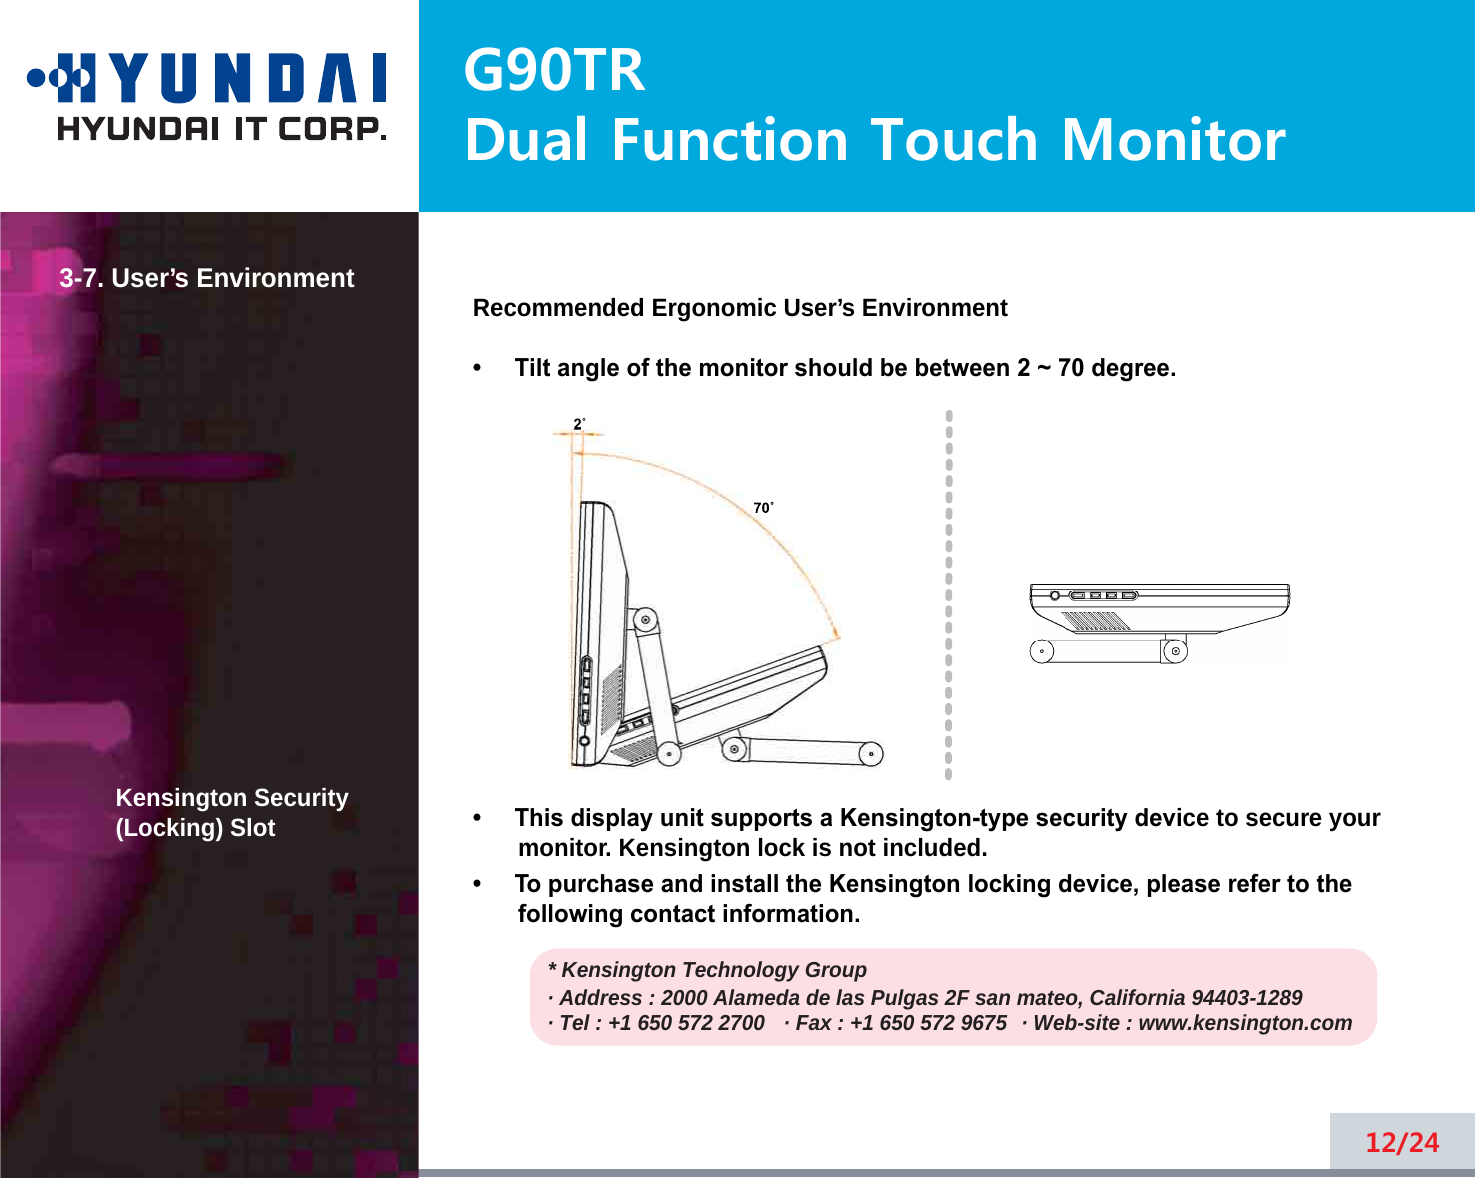 G90TRDual Function Touch Monitor3-7. User’s EnvironmentKensington Security(Locking) SlotRecommended Ergonomic User’s Environment•     Tilt angle of the monitor should be between 2 ~ 70 degree.•     This display unit supports a Kensington-type security device to secure yourmonitor. Kensington lock is not included.•     To purchase and install the Kensington locking device, please refer to thefollowing contact information.* Kensington Technology Group· Address : 2000 Alameda de las Pulgas 2F san mateo, California 94403-1289· Tel : +1 650 572 2700 · Fax : +1 650 572 9675 · Web-site : www.kensington.com12/242˚70˚2˚70˚